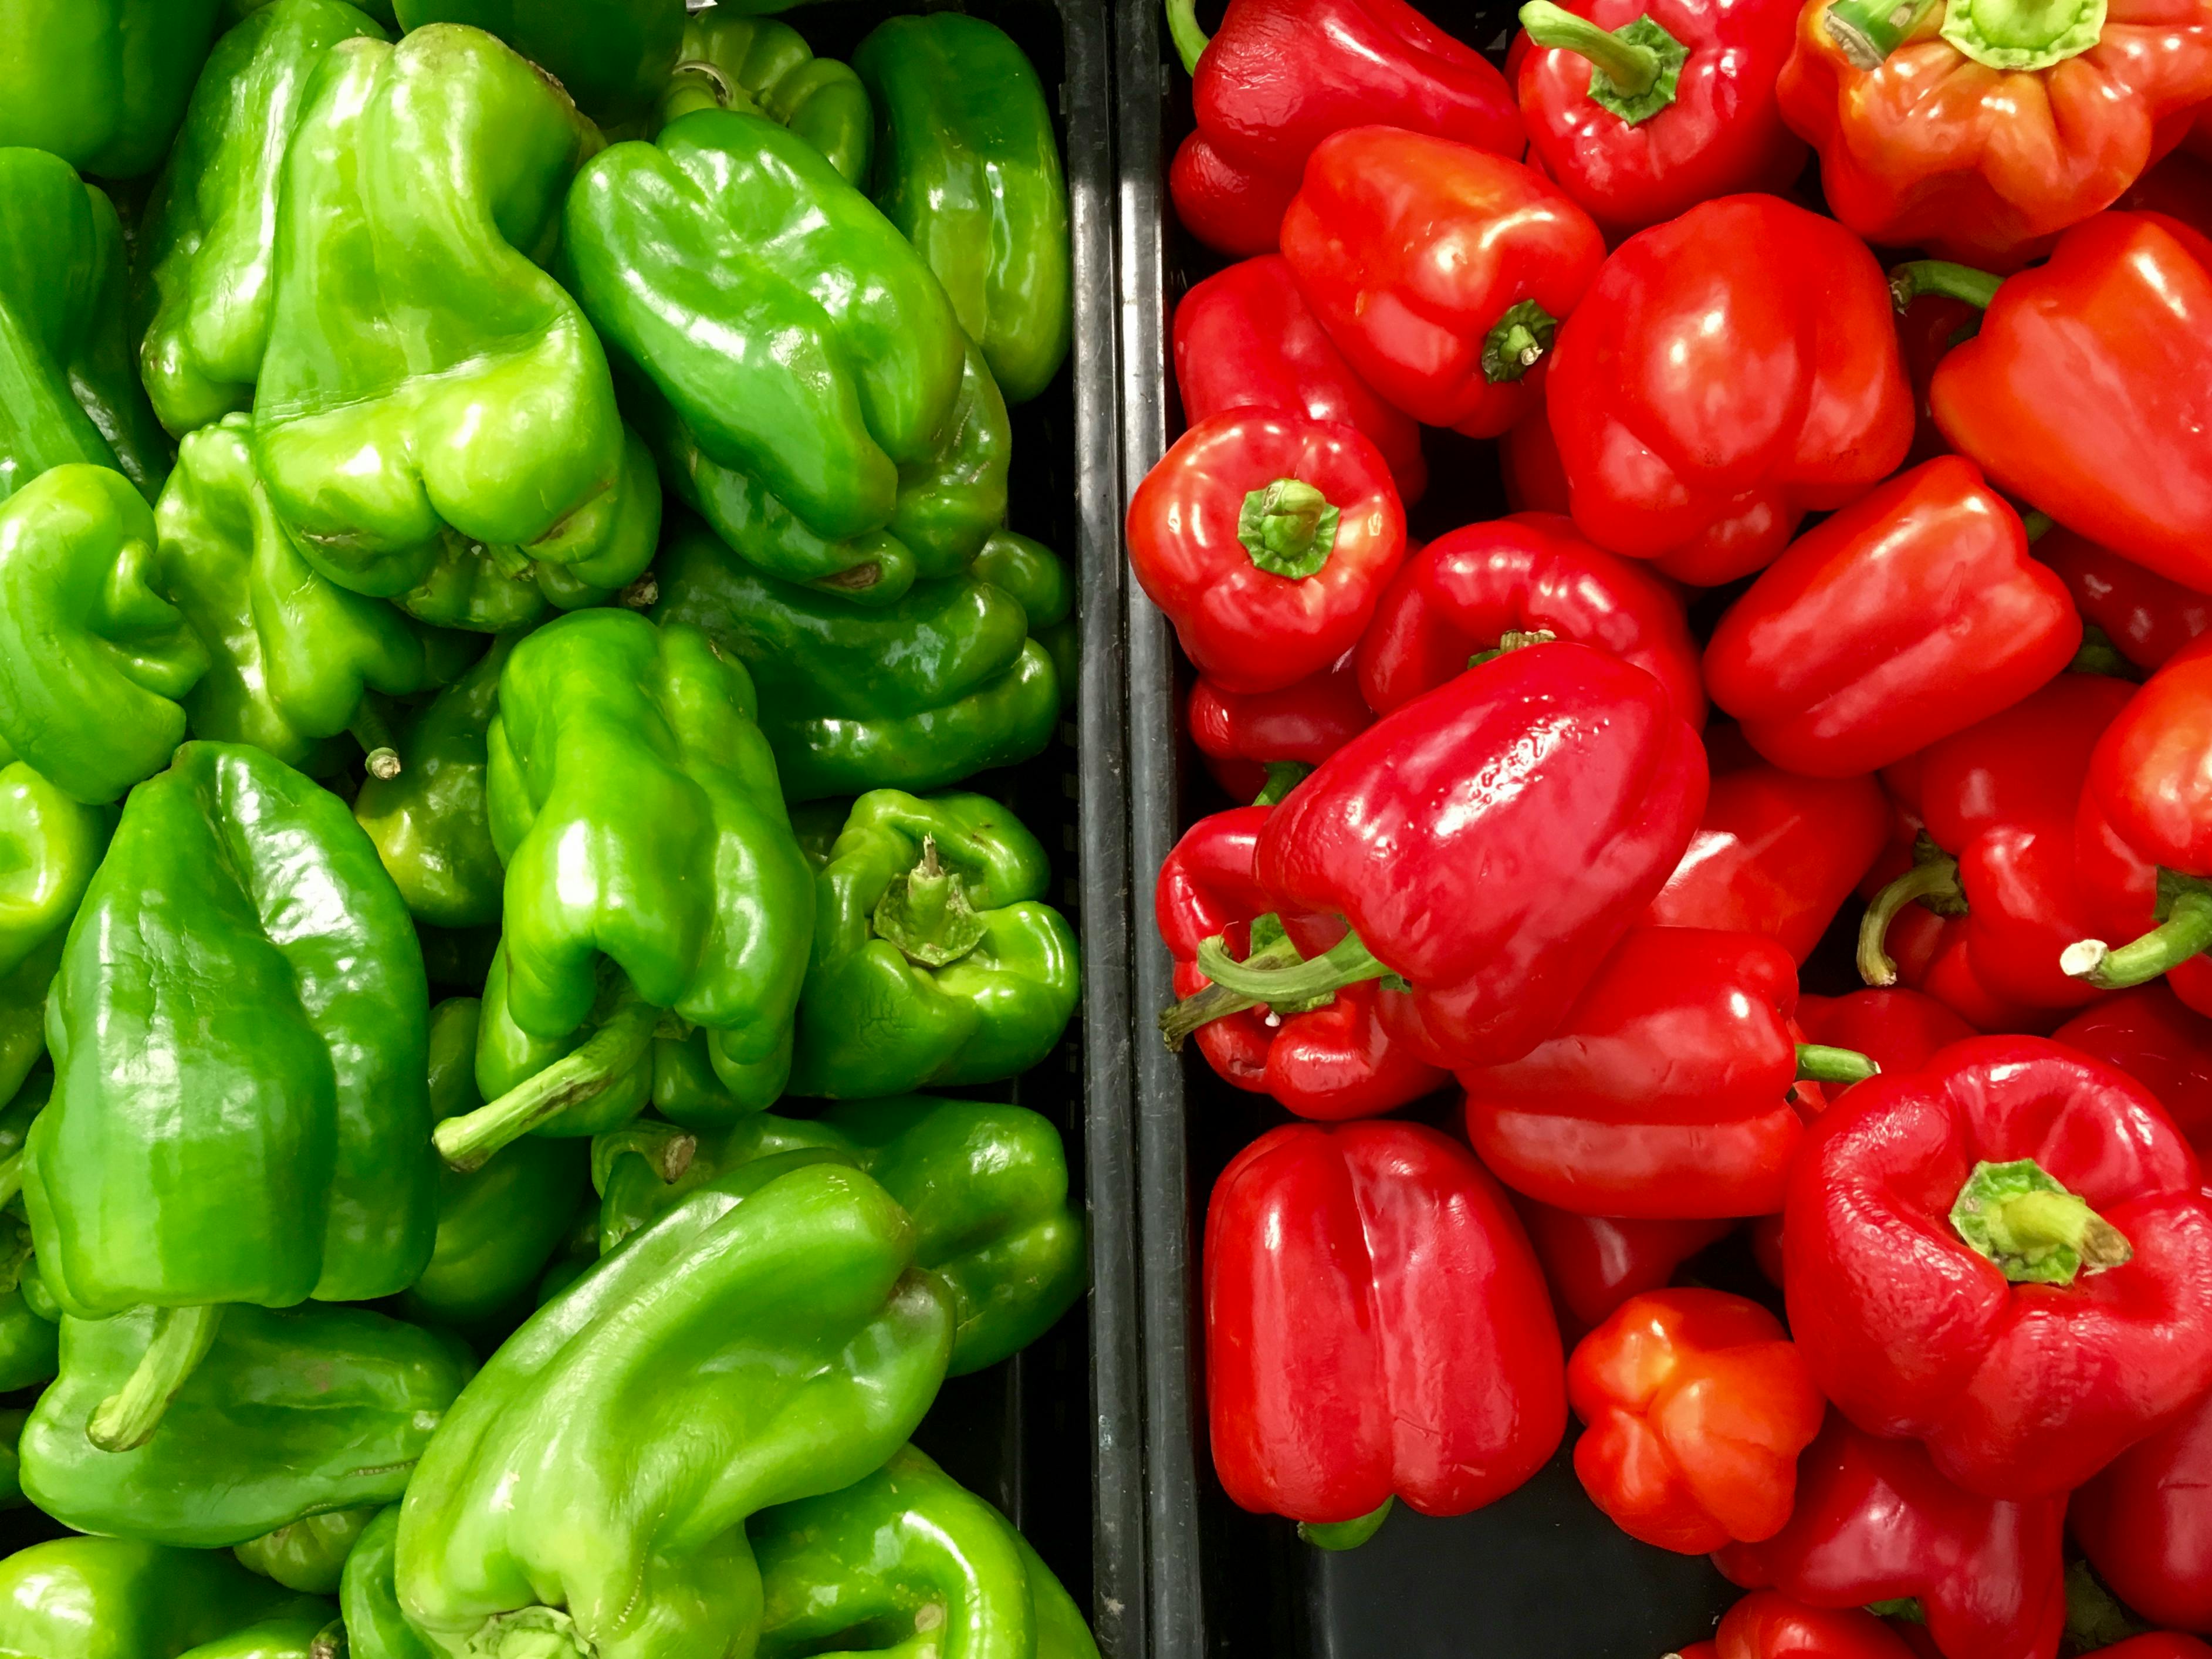 Red and green bell peppers | Photo: Pexels